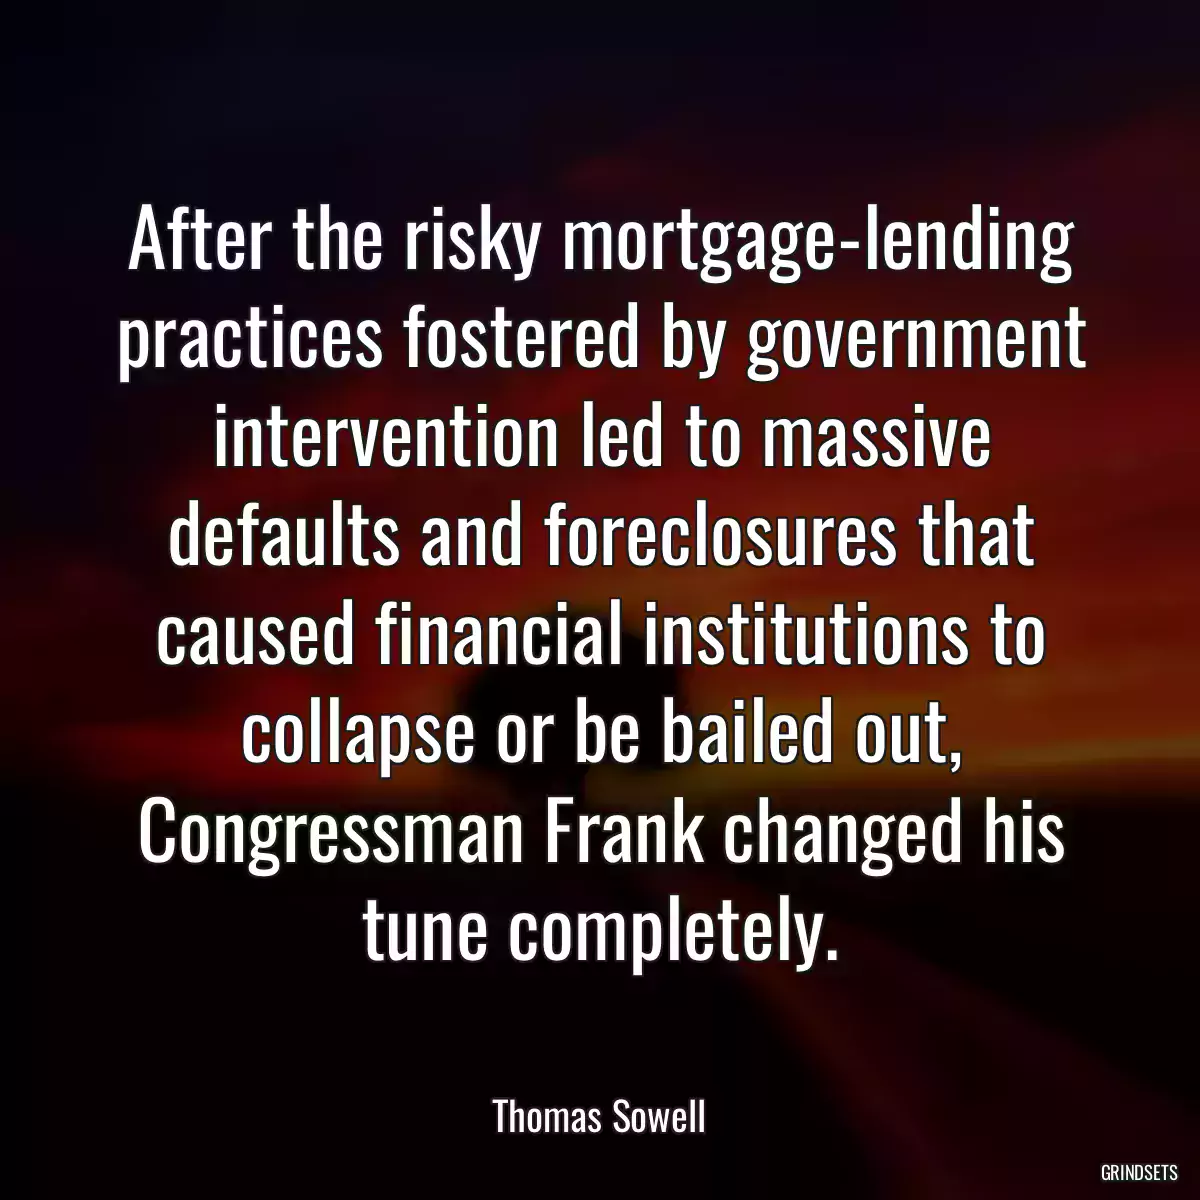 After the risky mortgage-lending practices fostered by government intervention led to massive defaults and foreclosures that caused financial institutions to collapse or be bailed out, Congressman Frank changed his tune completely.